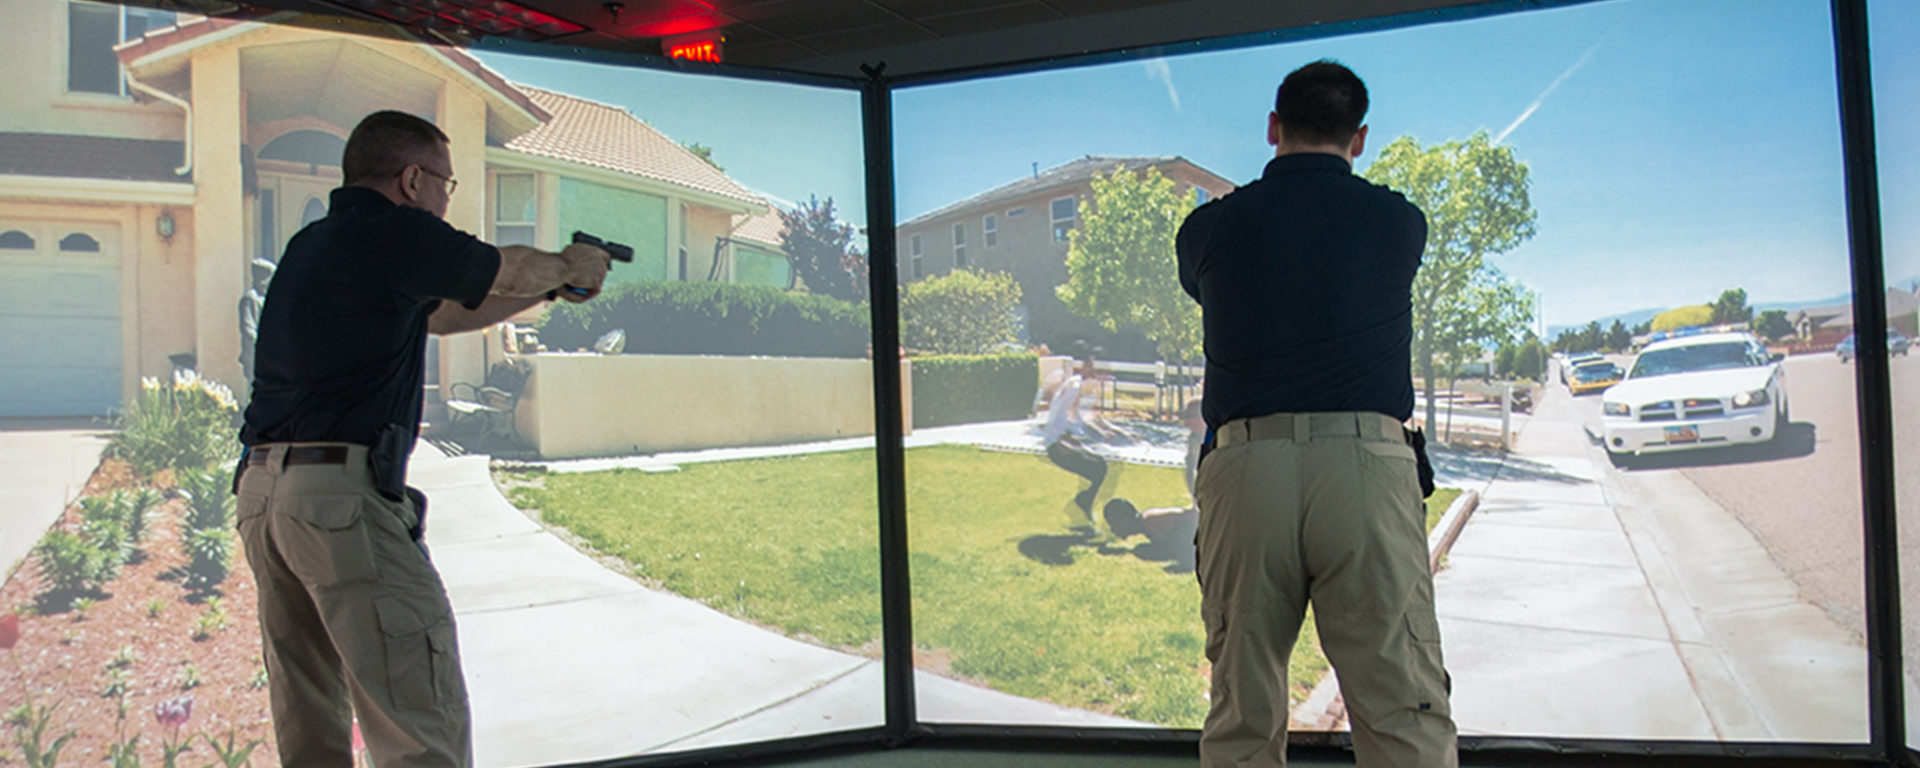 Training Specialist Chris Jones, left, and Training Coordinator Greg Coker participate in a firearm simulation at the LEIC in March.